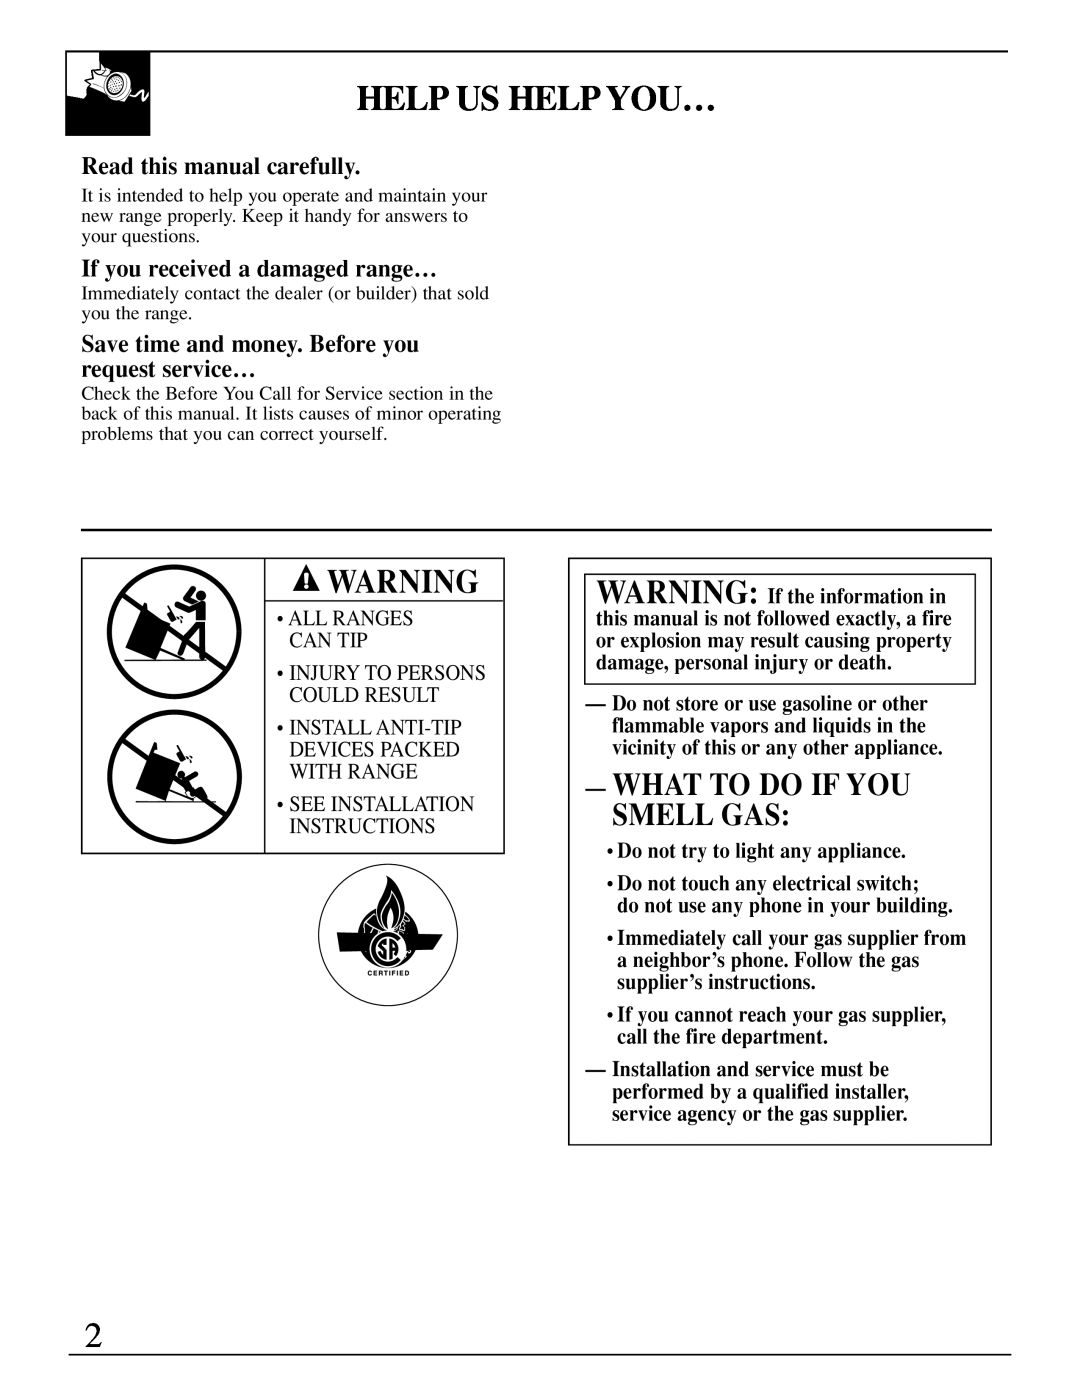 GE XL44 Help Us Help You…, What To Do If You Smell Gas, Read this manual carefully, If you received a damaged range… 